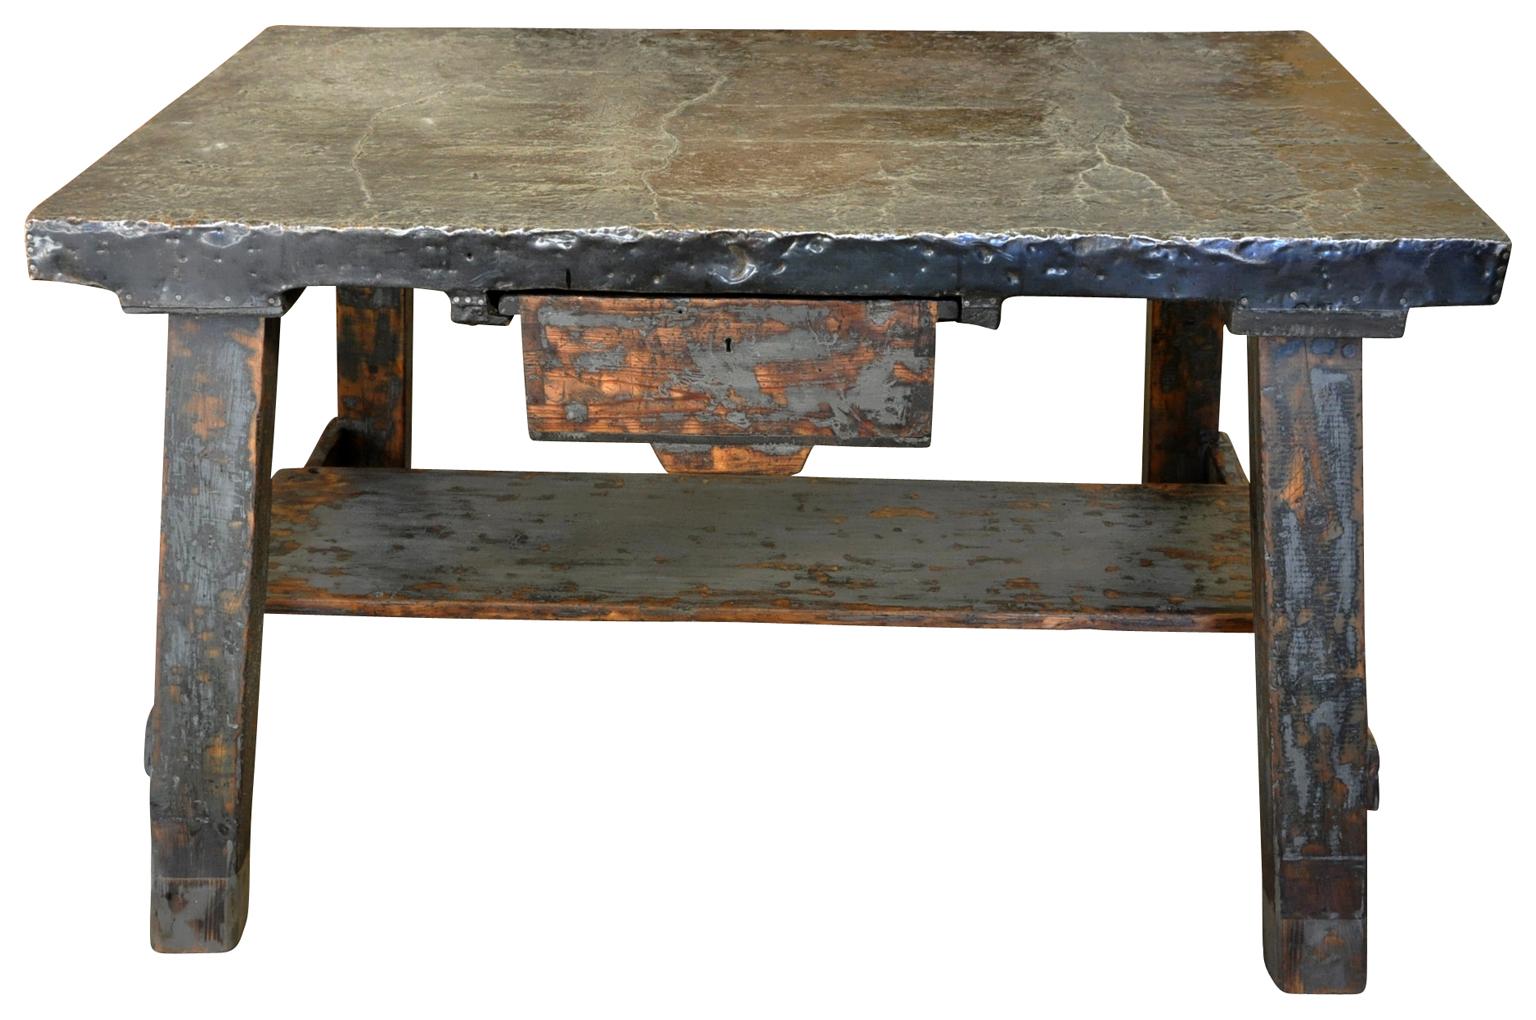 A terrific later 19th century work table, Etabli, from the Catalan region of Spain. Soundly constructed from painted wood with a wonderful zinc clad top and a single drawer. Great patina. A wonderful side table or small kitchen island.

       